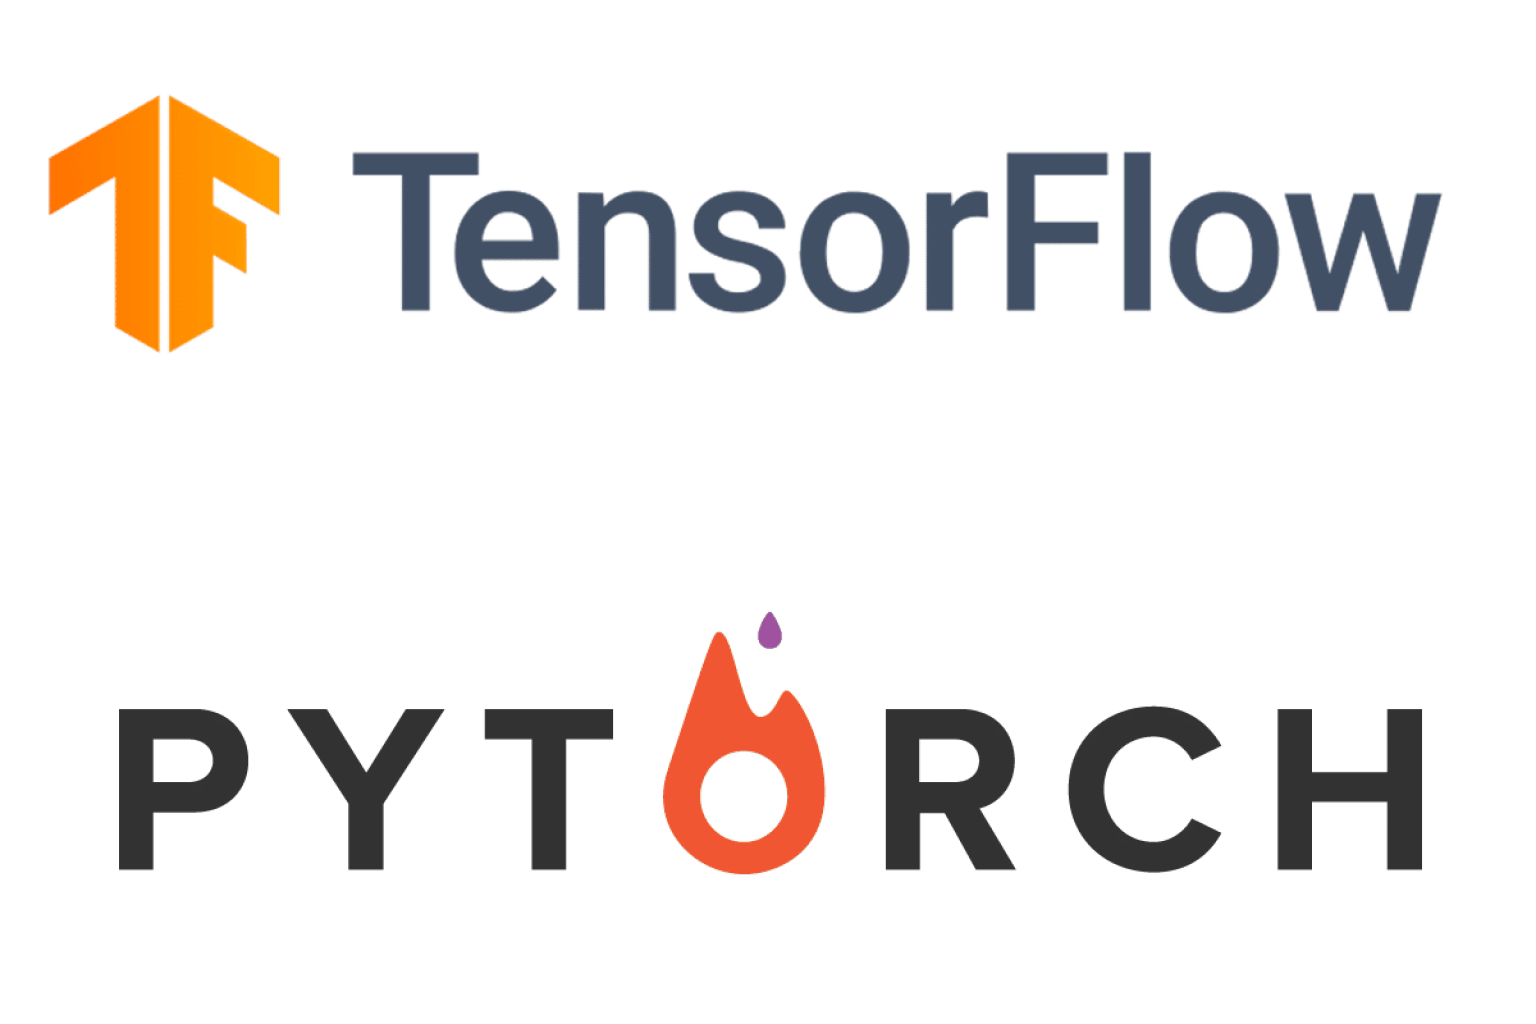 PyTorch and TensorFlow are two of the most popular deep learning frameworks used in the data science community. With the recent release of PyTorch 2.0, many are wondering if it can compete with TensorFlow's dominance. In this blog post, we will compare PyTorch 2.0 and TensorFlow and see if PyTorch 2.0 is the game changer that everyone is talking about.